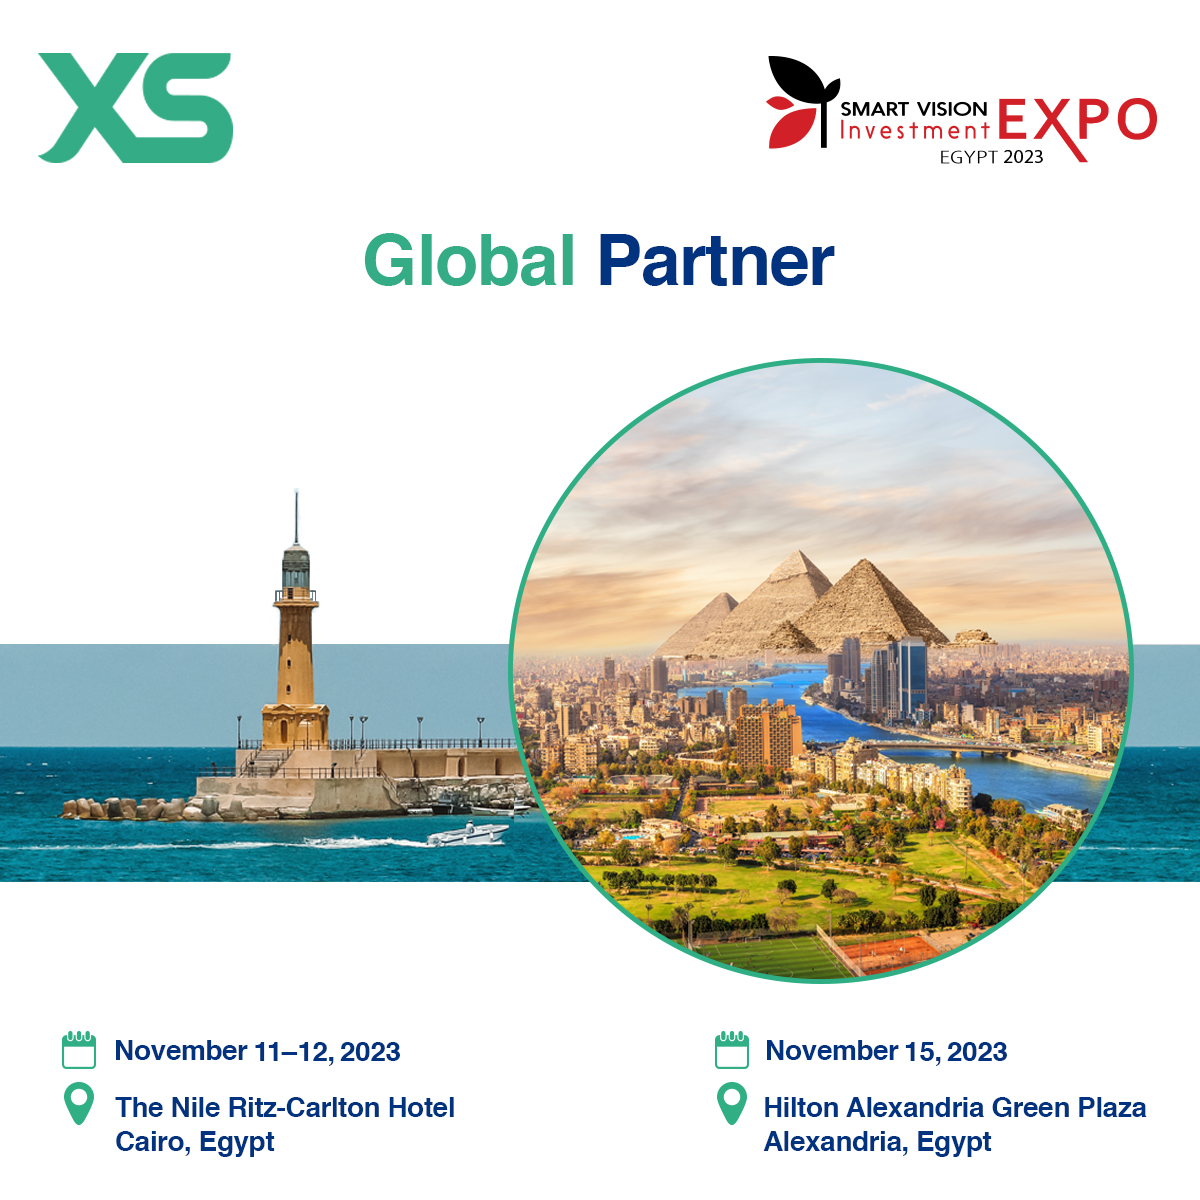 XS.com Joins as Global Partner for the Smart Vision Investment Expo in Egypt